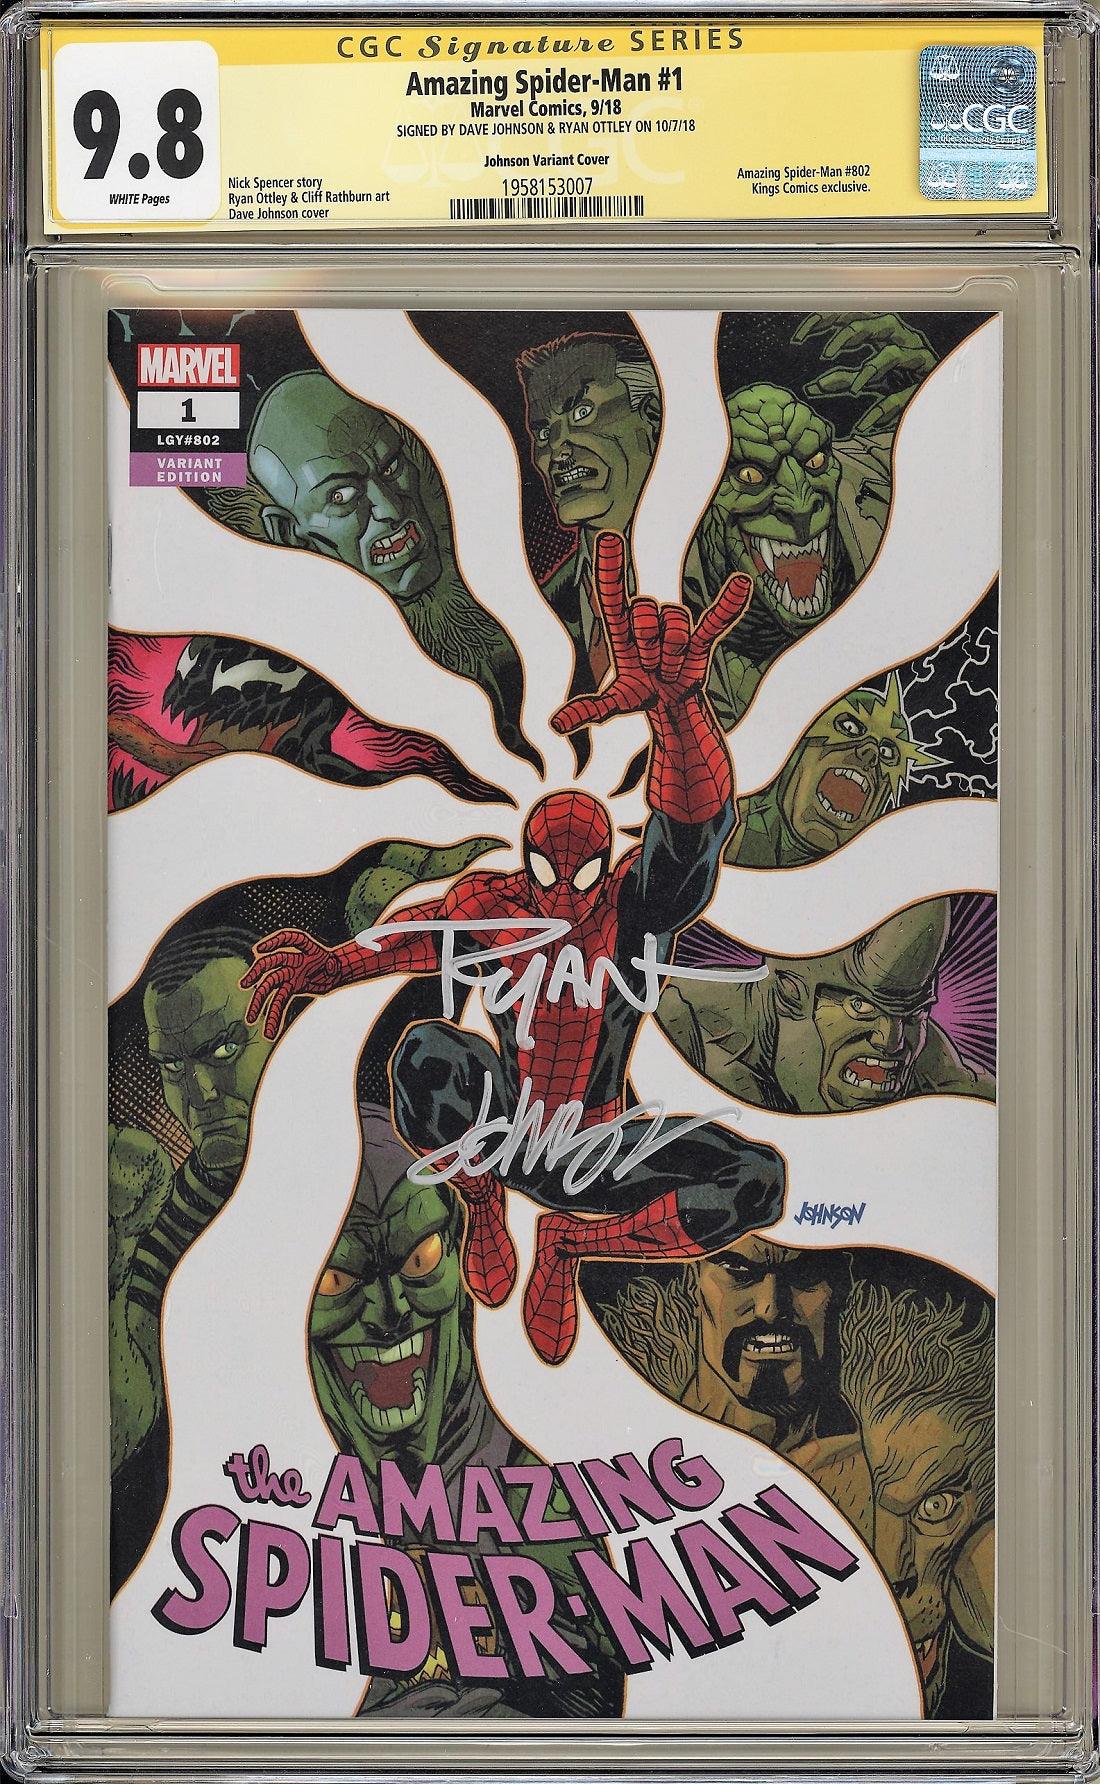 CGC AMAZING SPIDER-MAN VOL 5 #1 KINGS COMICS EXCLUSIVE (9.8) SIGNATURE SERIES - SIGNED BY DAVE JOHNSON & RYAN OTTLEY - Kings Comics